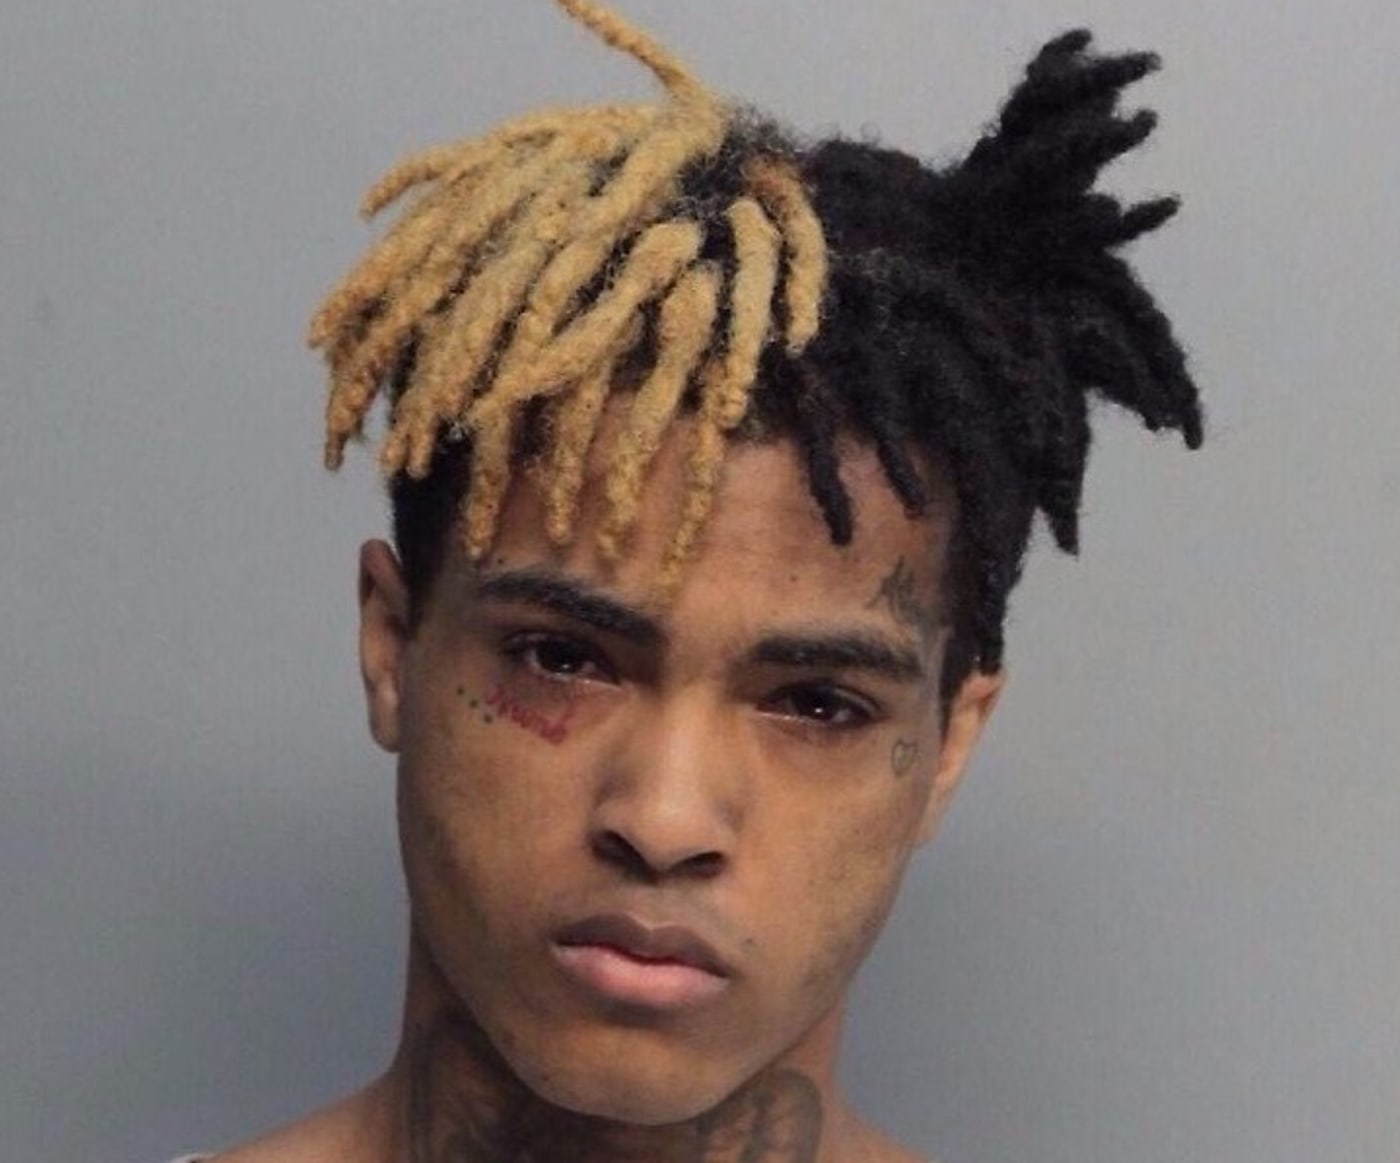 XXXTENTACION Just Entered The Billboard Hot 100 With “Look At Me ...